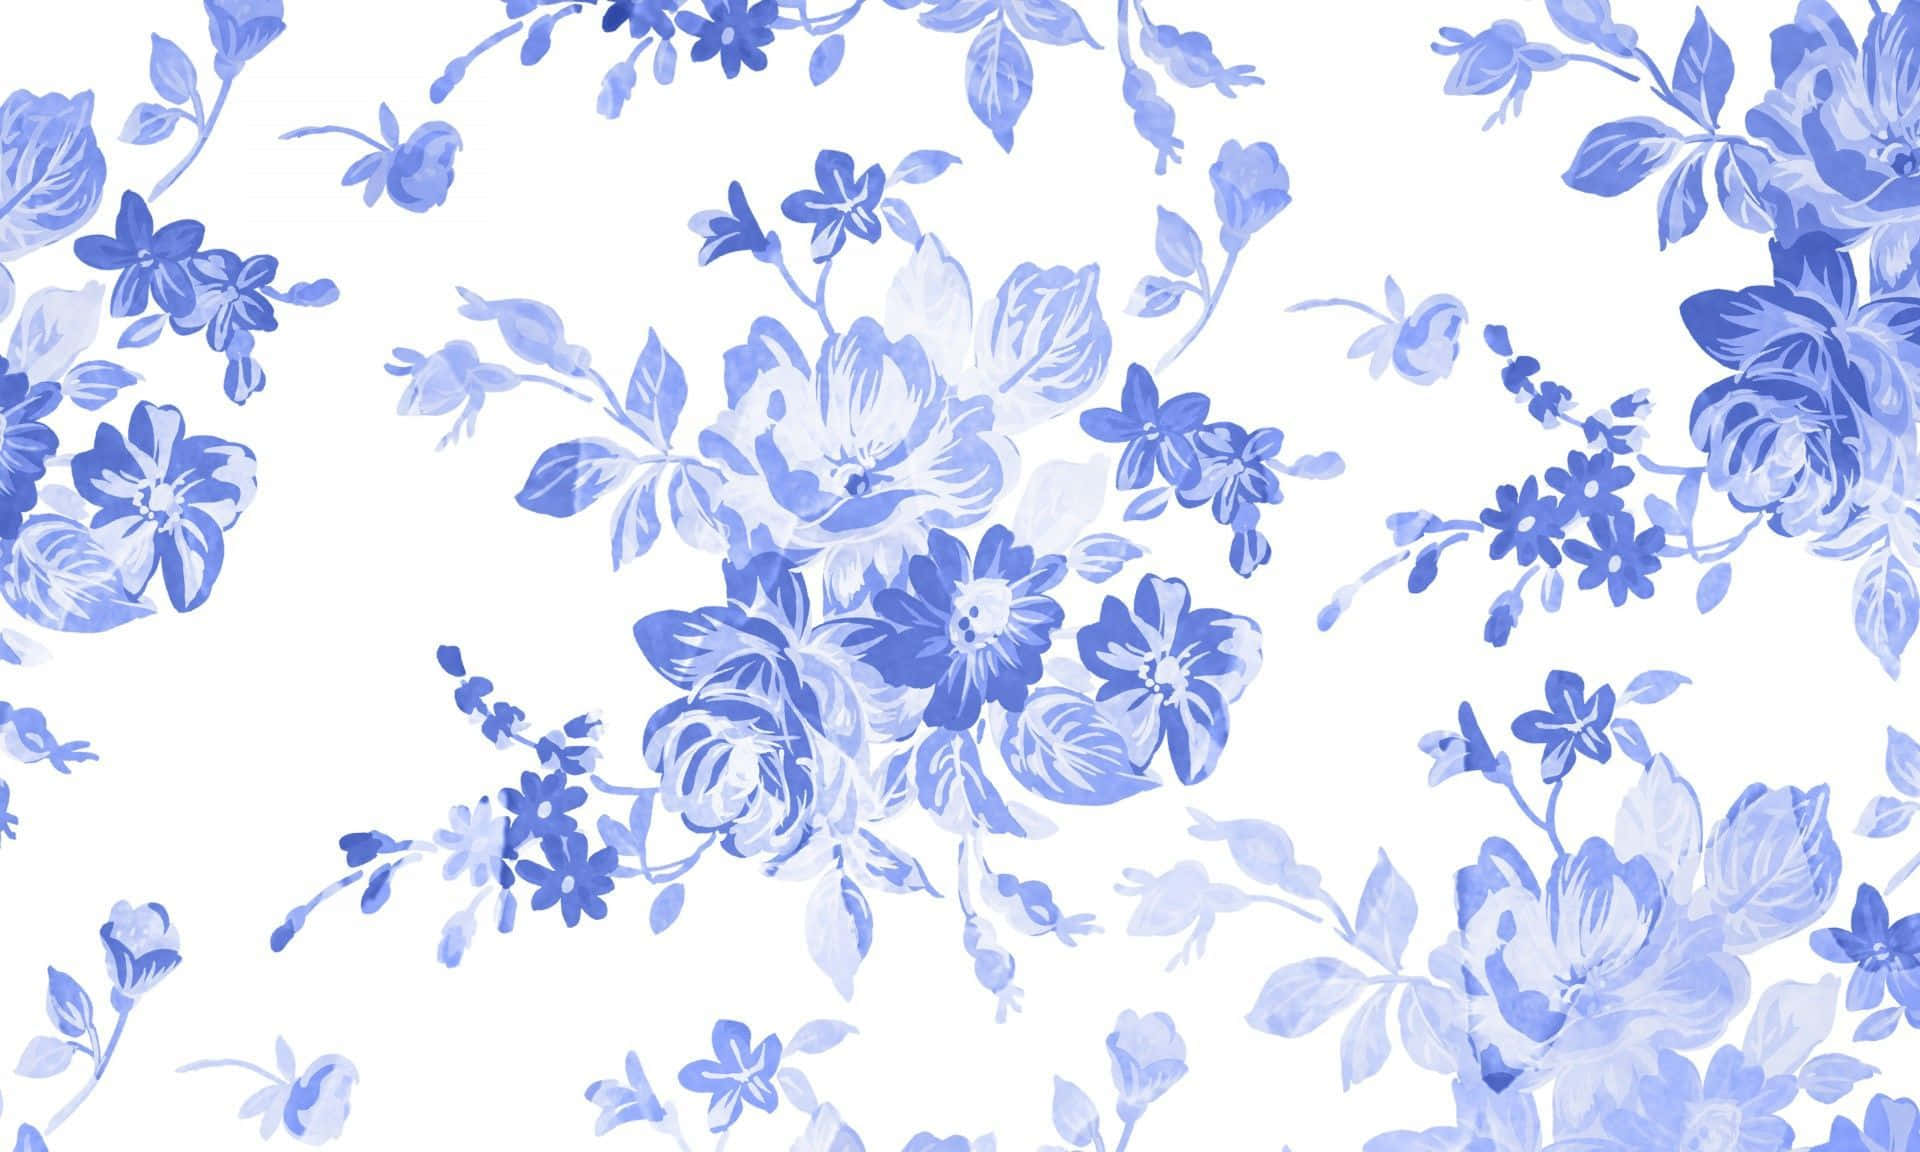 A bright blue backdrop of floral patterns perfect for any decor.